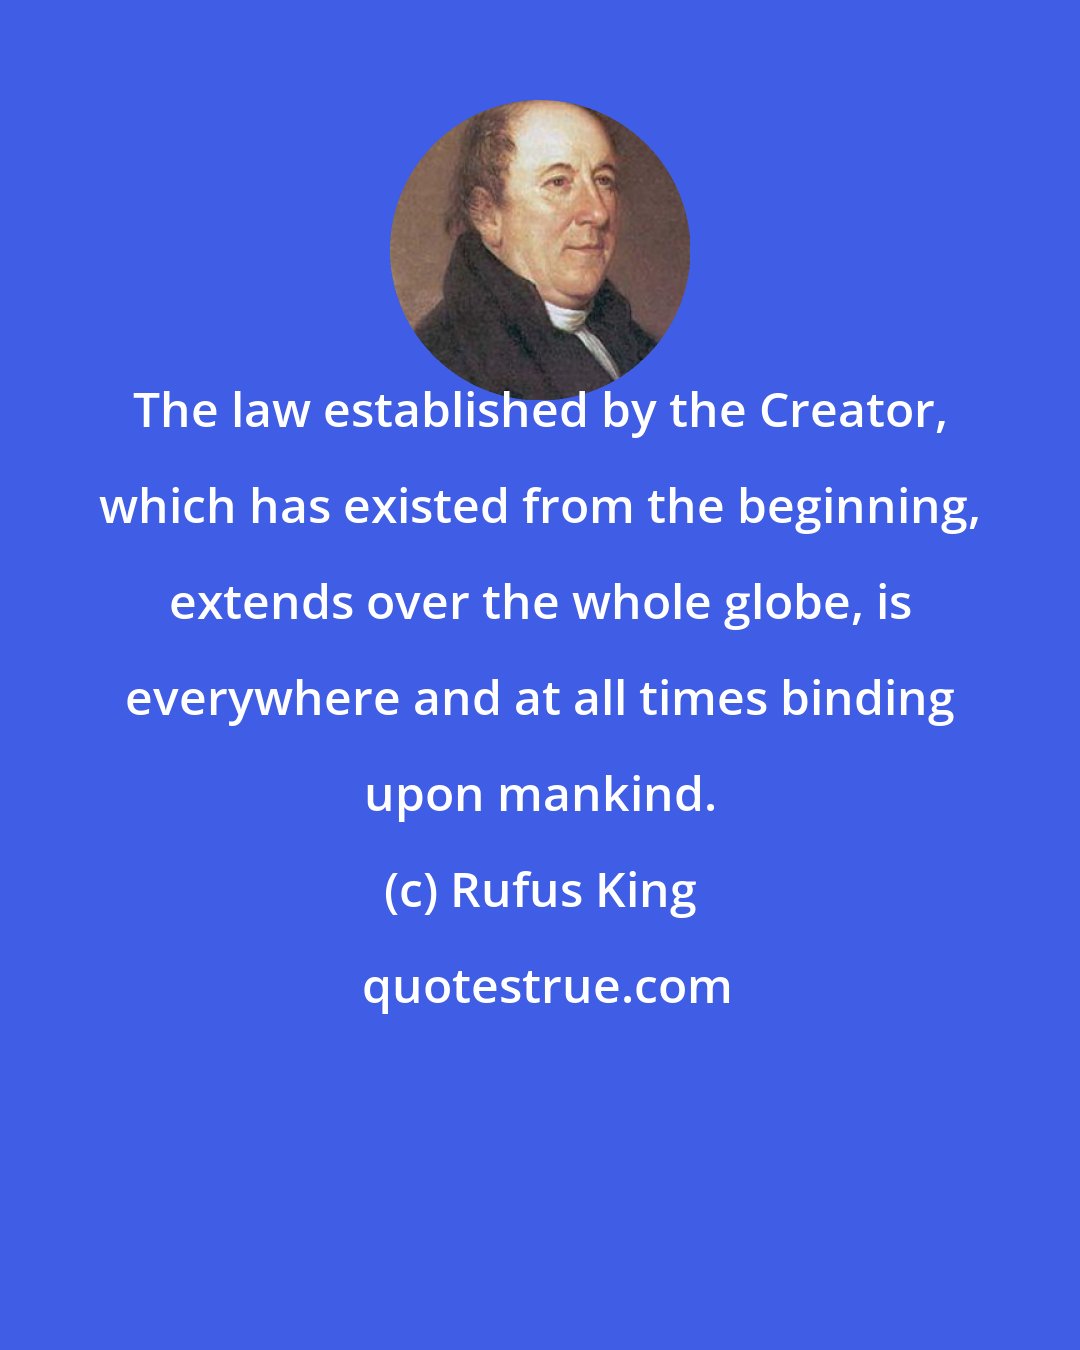 Rufus King: The law established by the Creator, which has existed from the beginning, extends over the whole globe, is everywhere and at all times binding upon mankind.